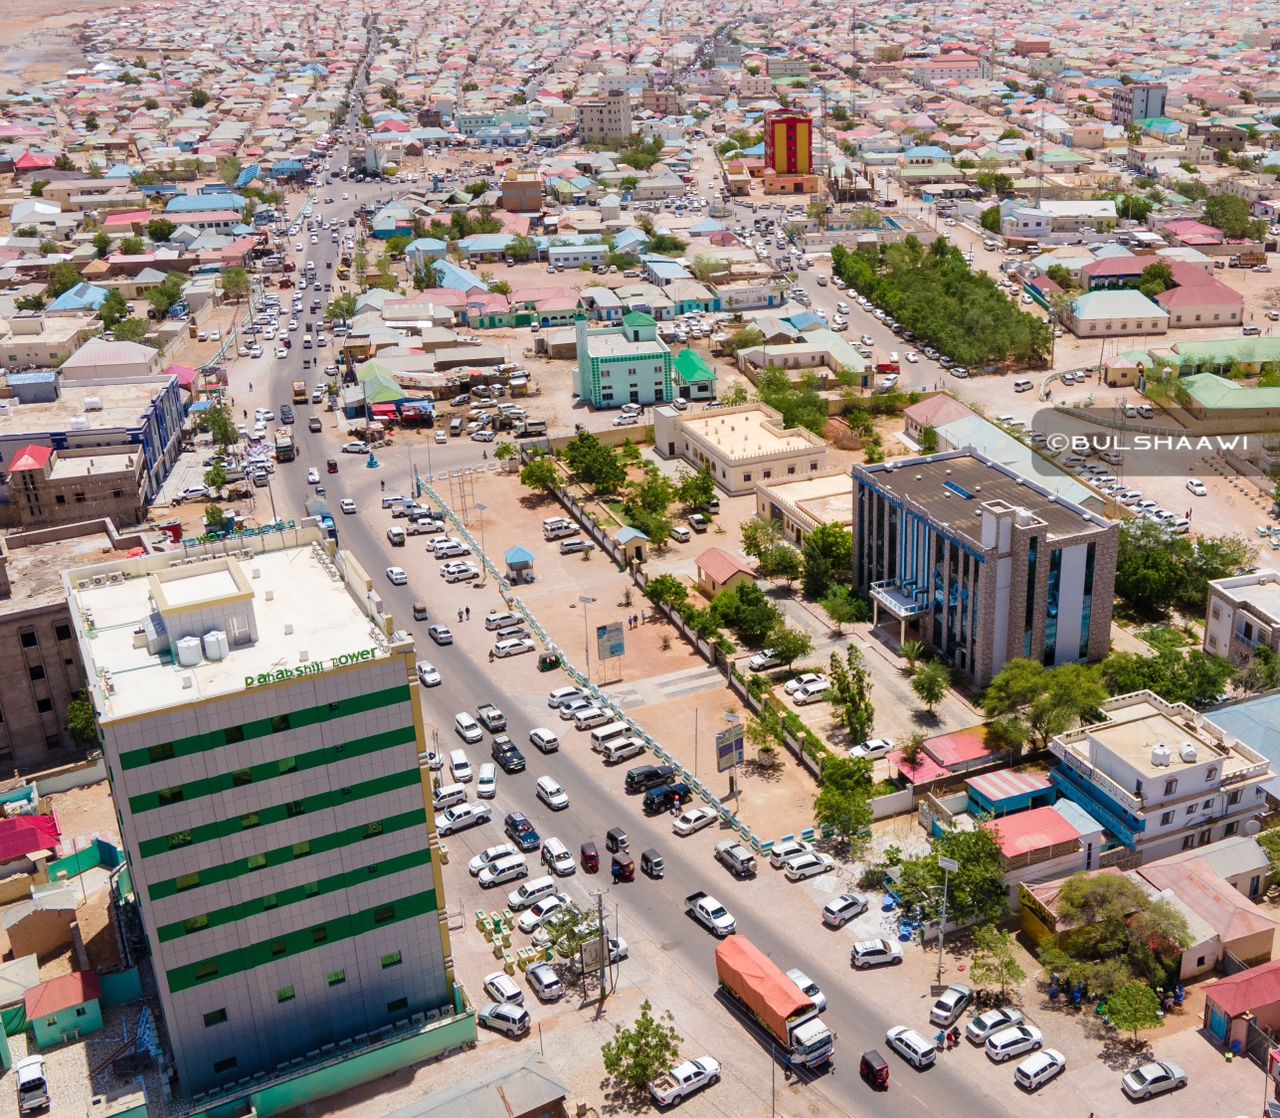 Areal view Garowe showing The Central Bank of Puntland and the Dahabshiil Tower | Photo: Abdirahman Bulshaawi for Gorfayn